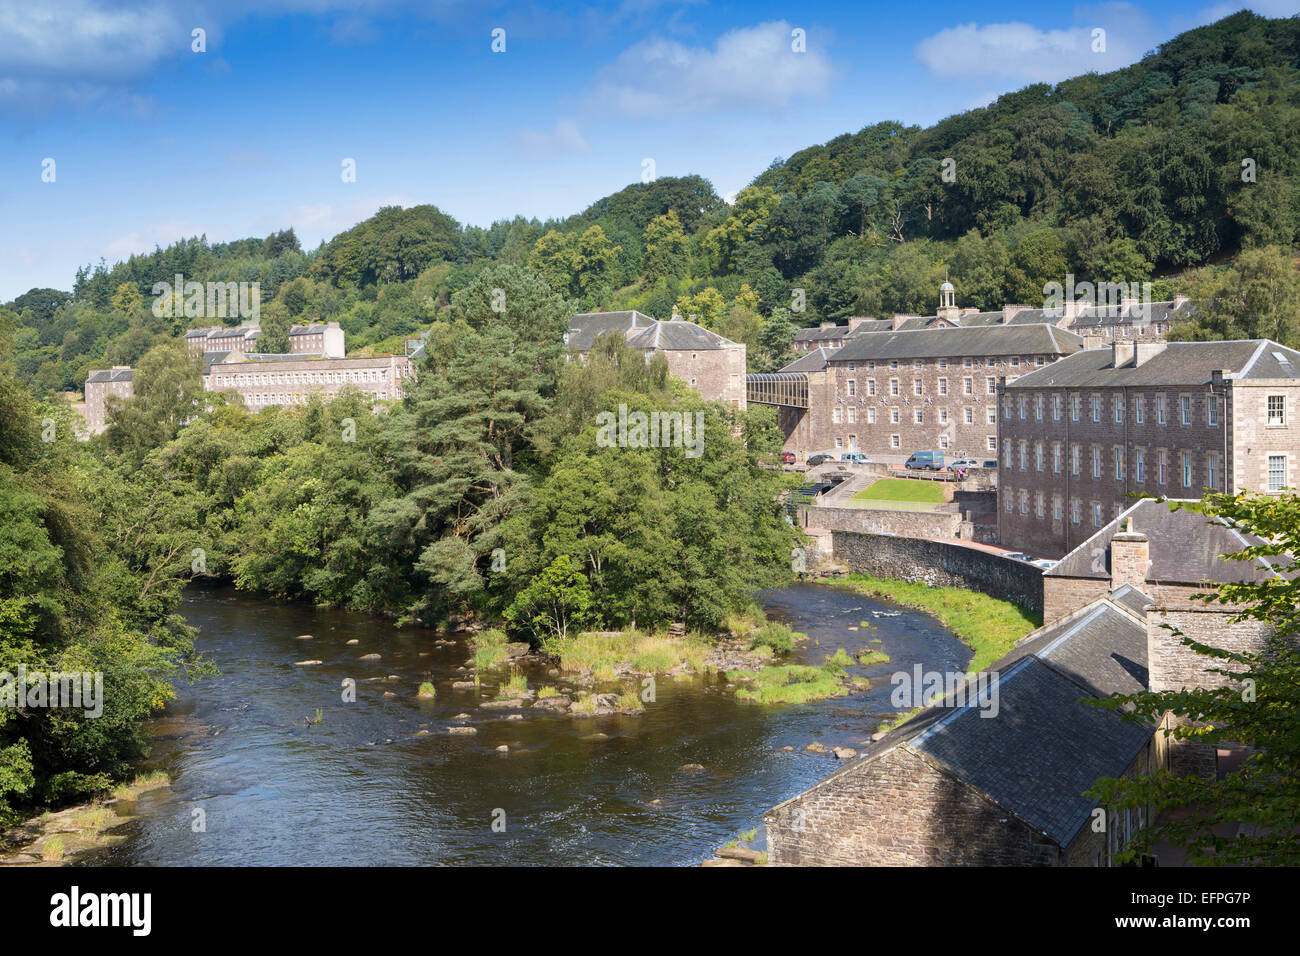 View of the town of New Lanark, UNESCO World Heritage Site, and the Clyde River, Lanarkshire, Scotland, United Kingdom, Euope Stock Photo